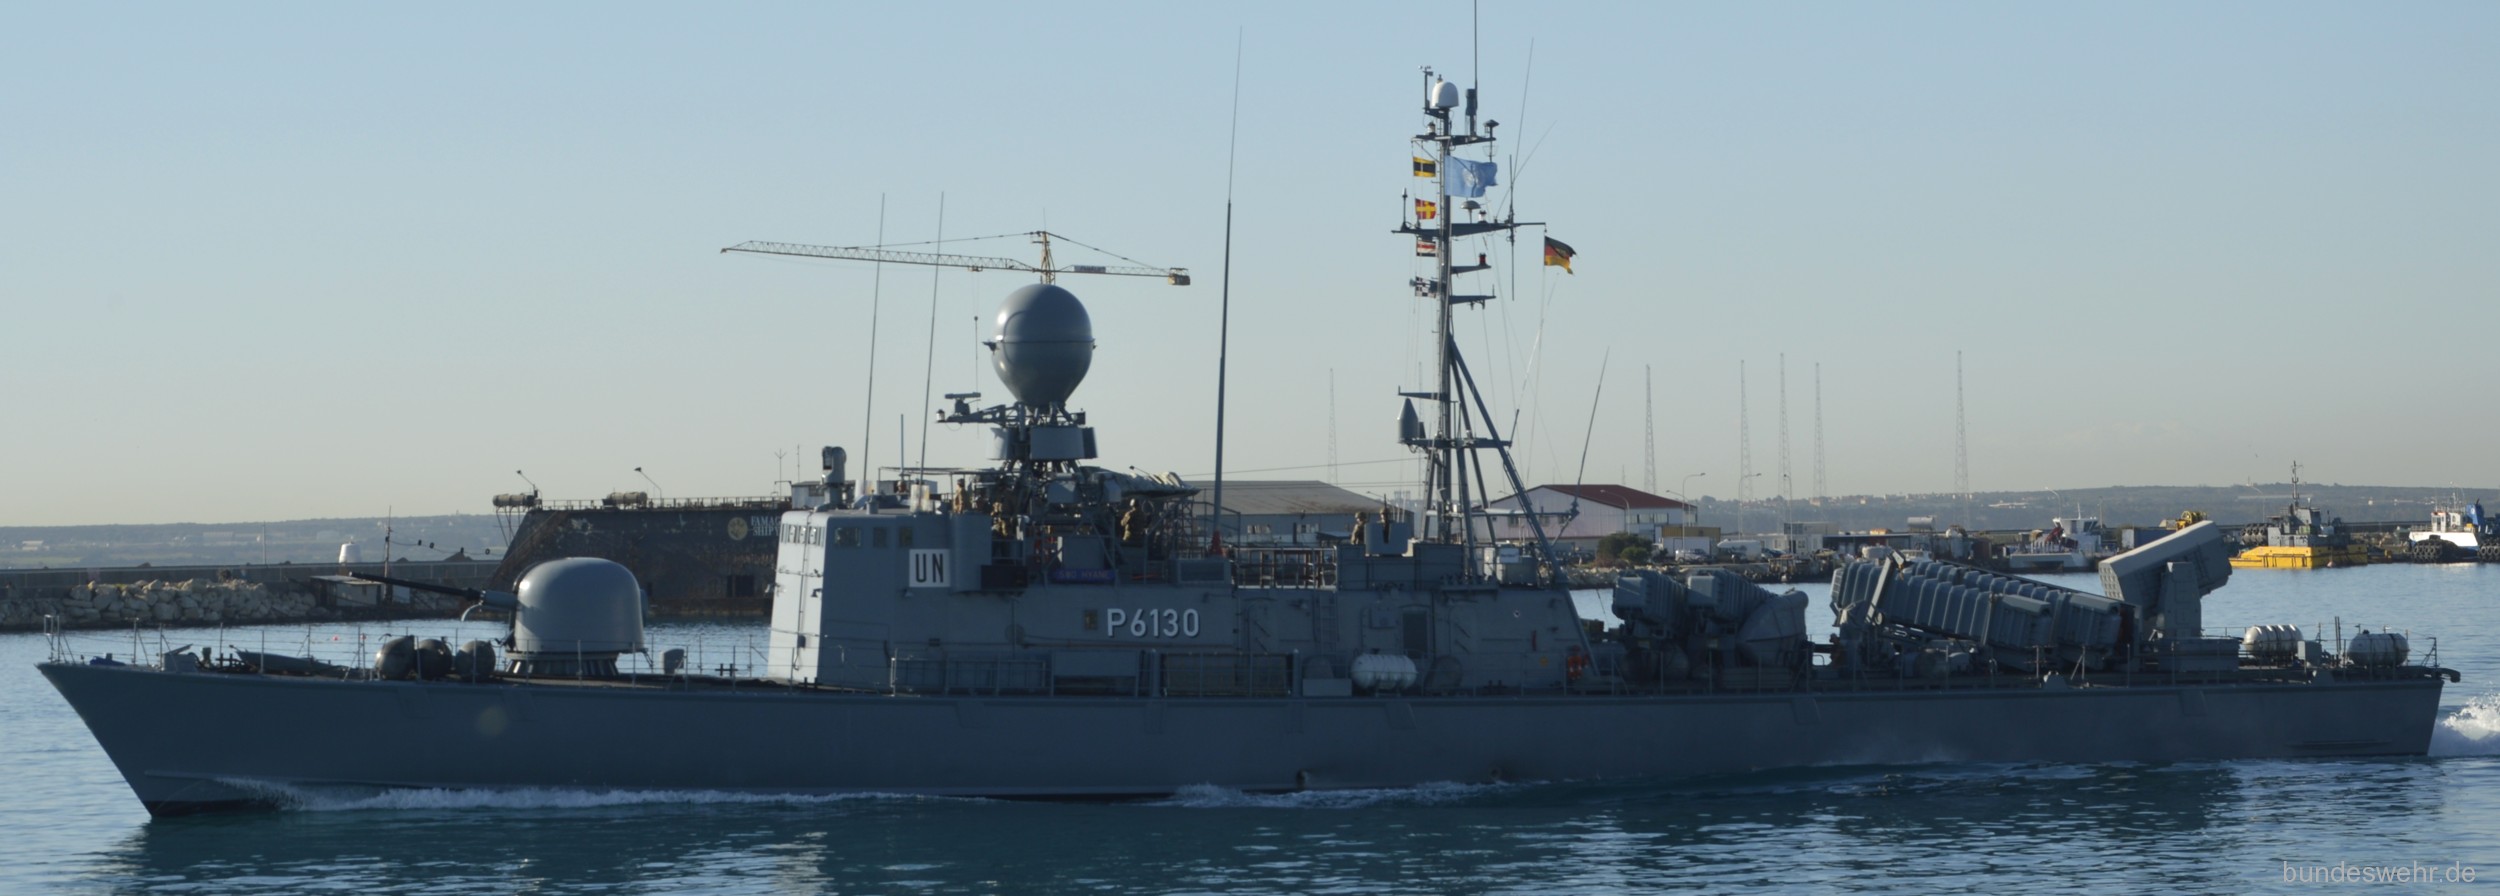 p6130 s80 fgs hyane type 143a gepard class fast attack missile craft german navy 02